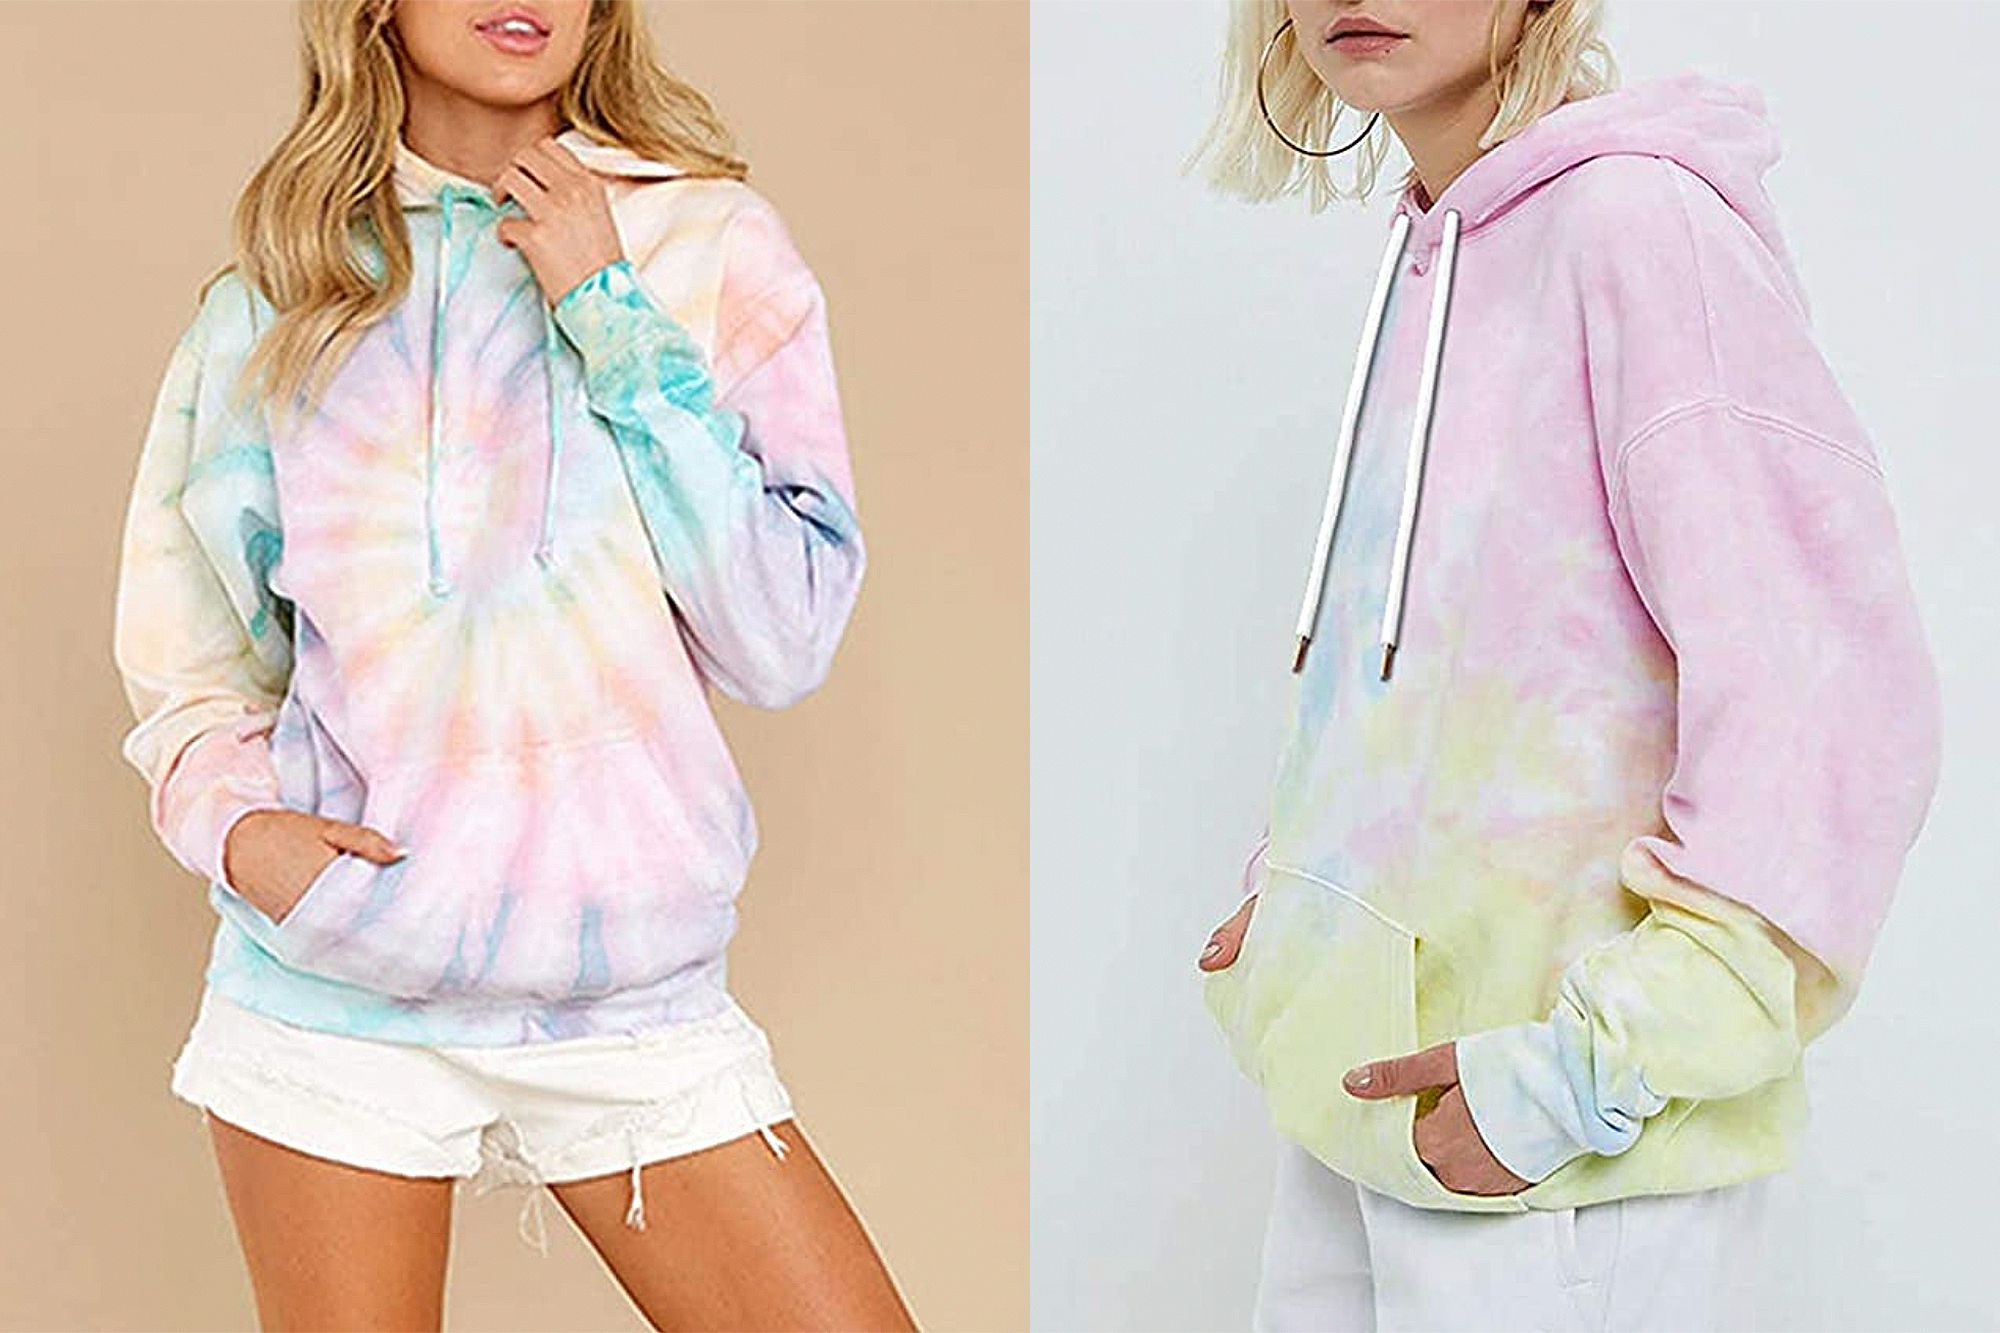 EFAN Hoodie Is the Next Addition to Your Tie-Dye Collection